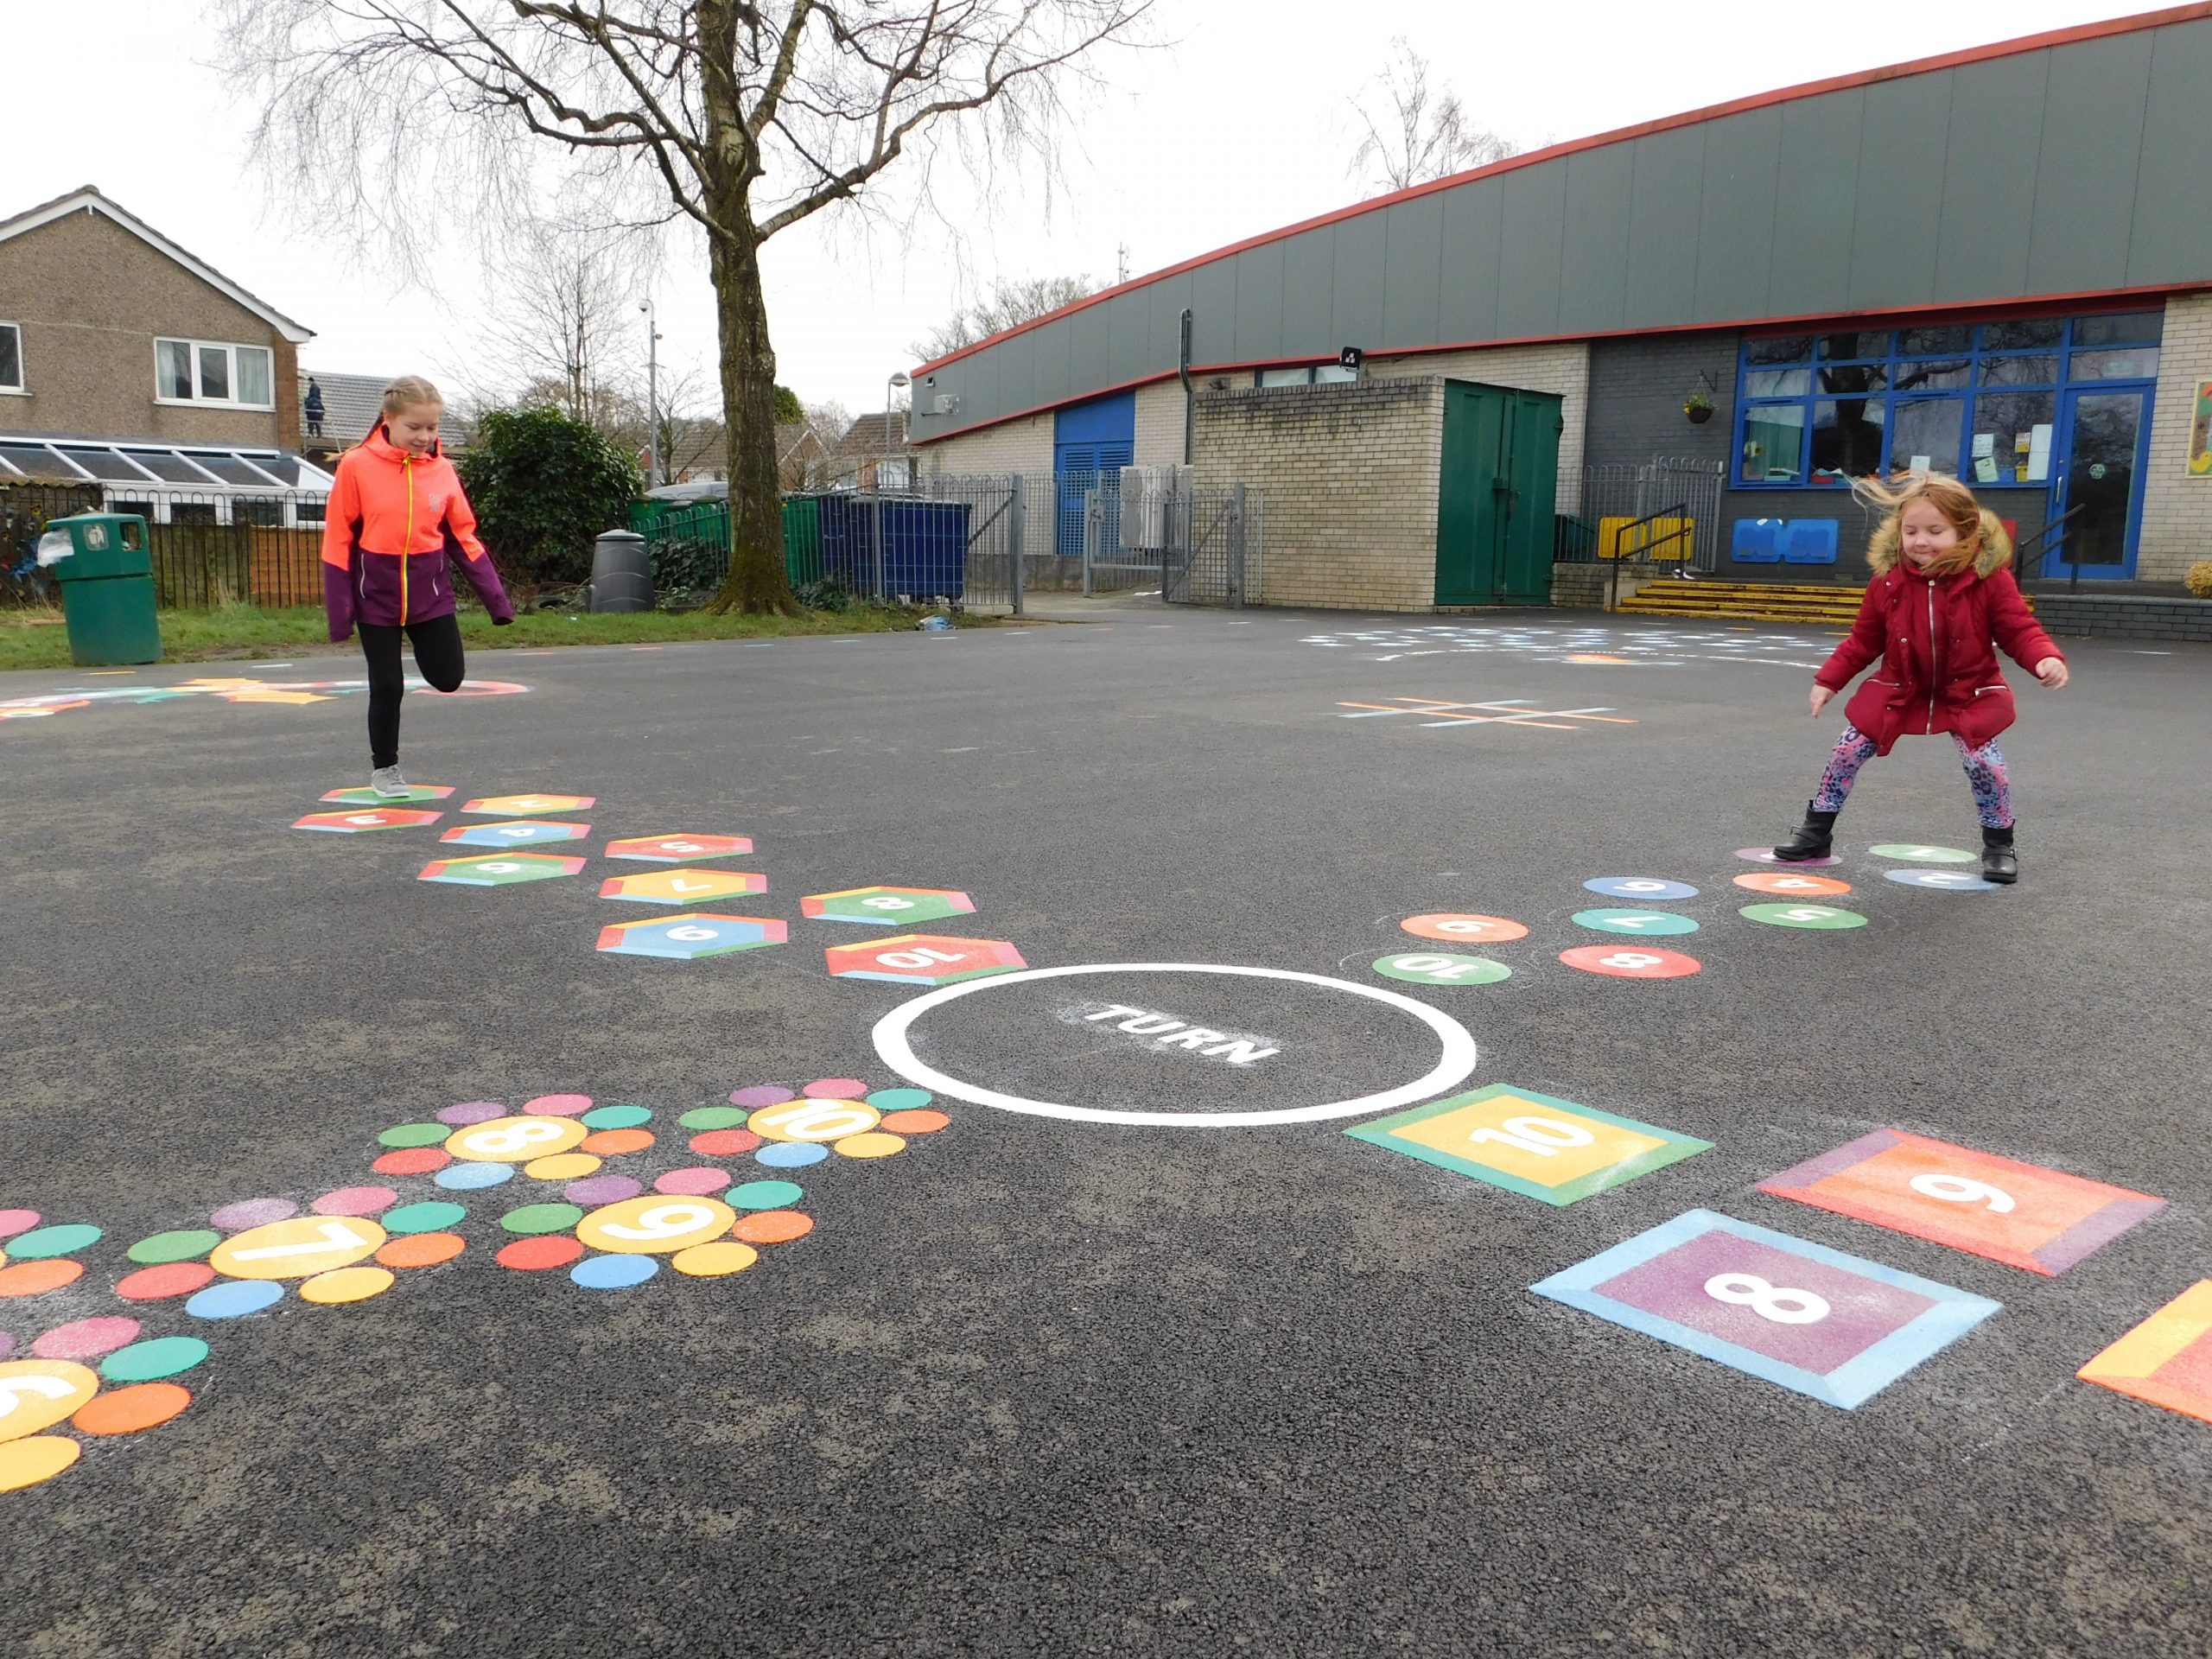 Teaching creative subjects in the playground